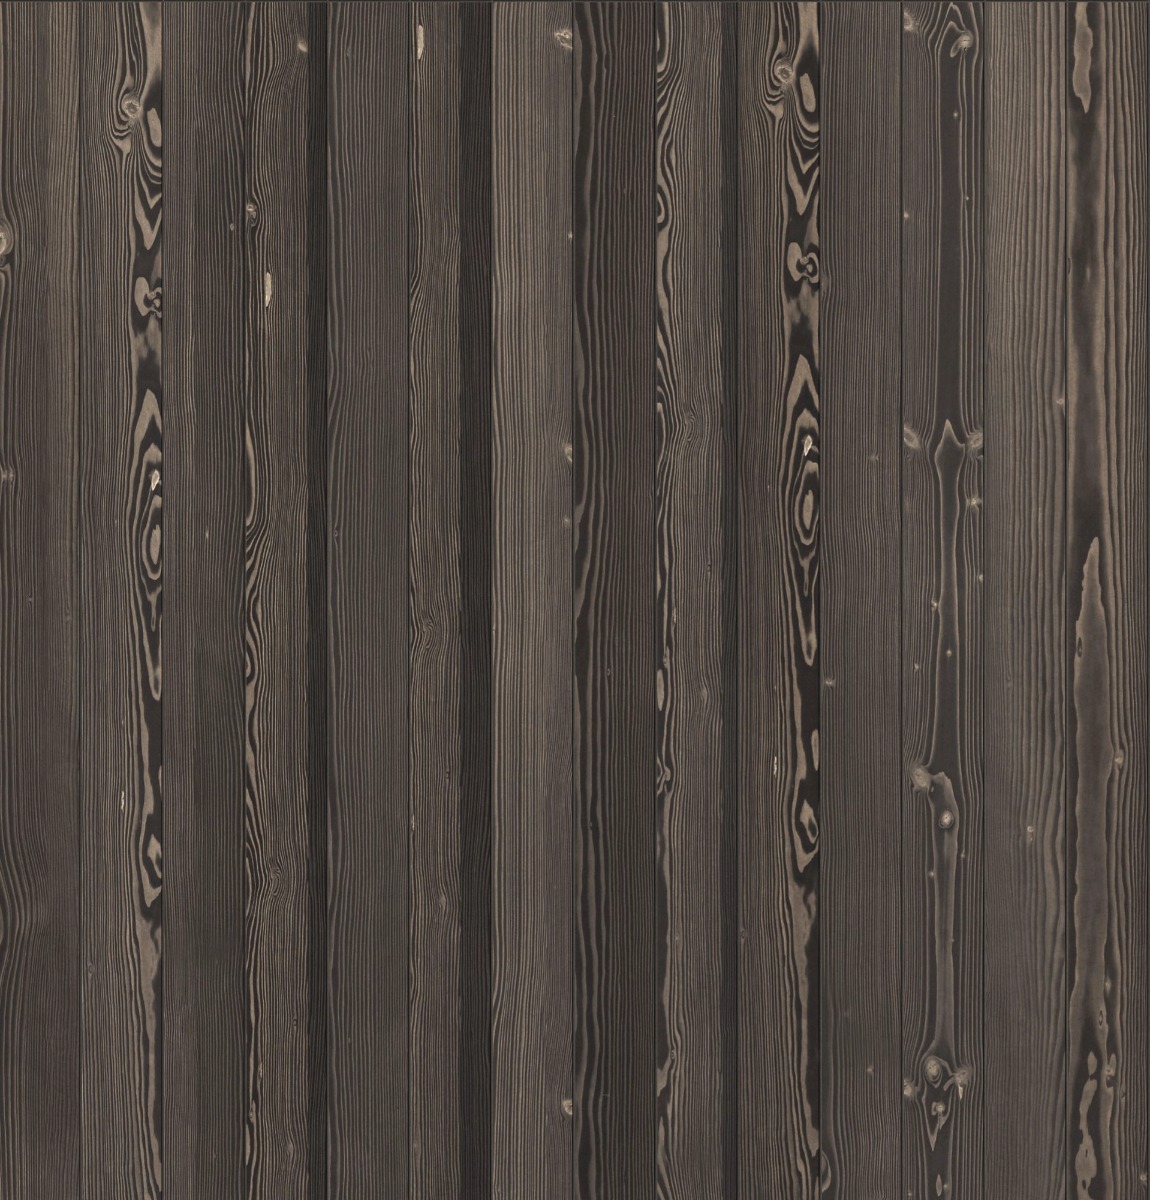 A seamless wood texture with shou sugi ban (yakisugi) boards arranged in a Stack pattern